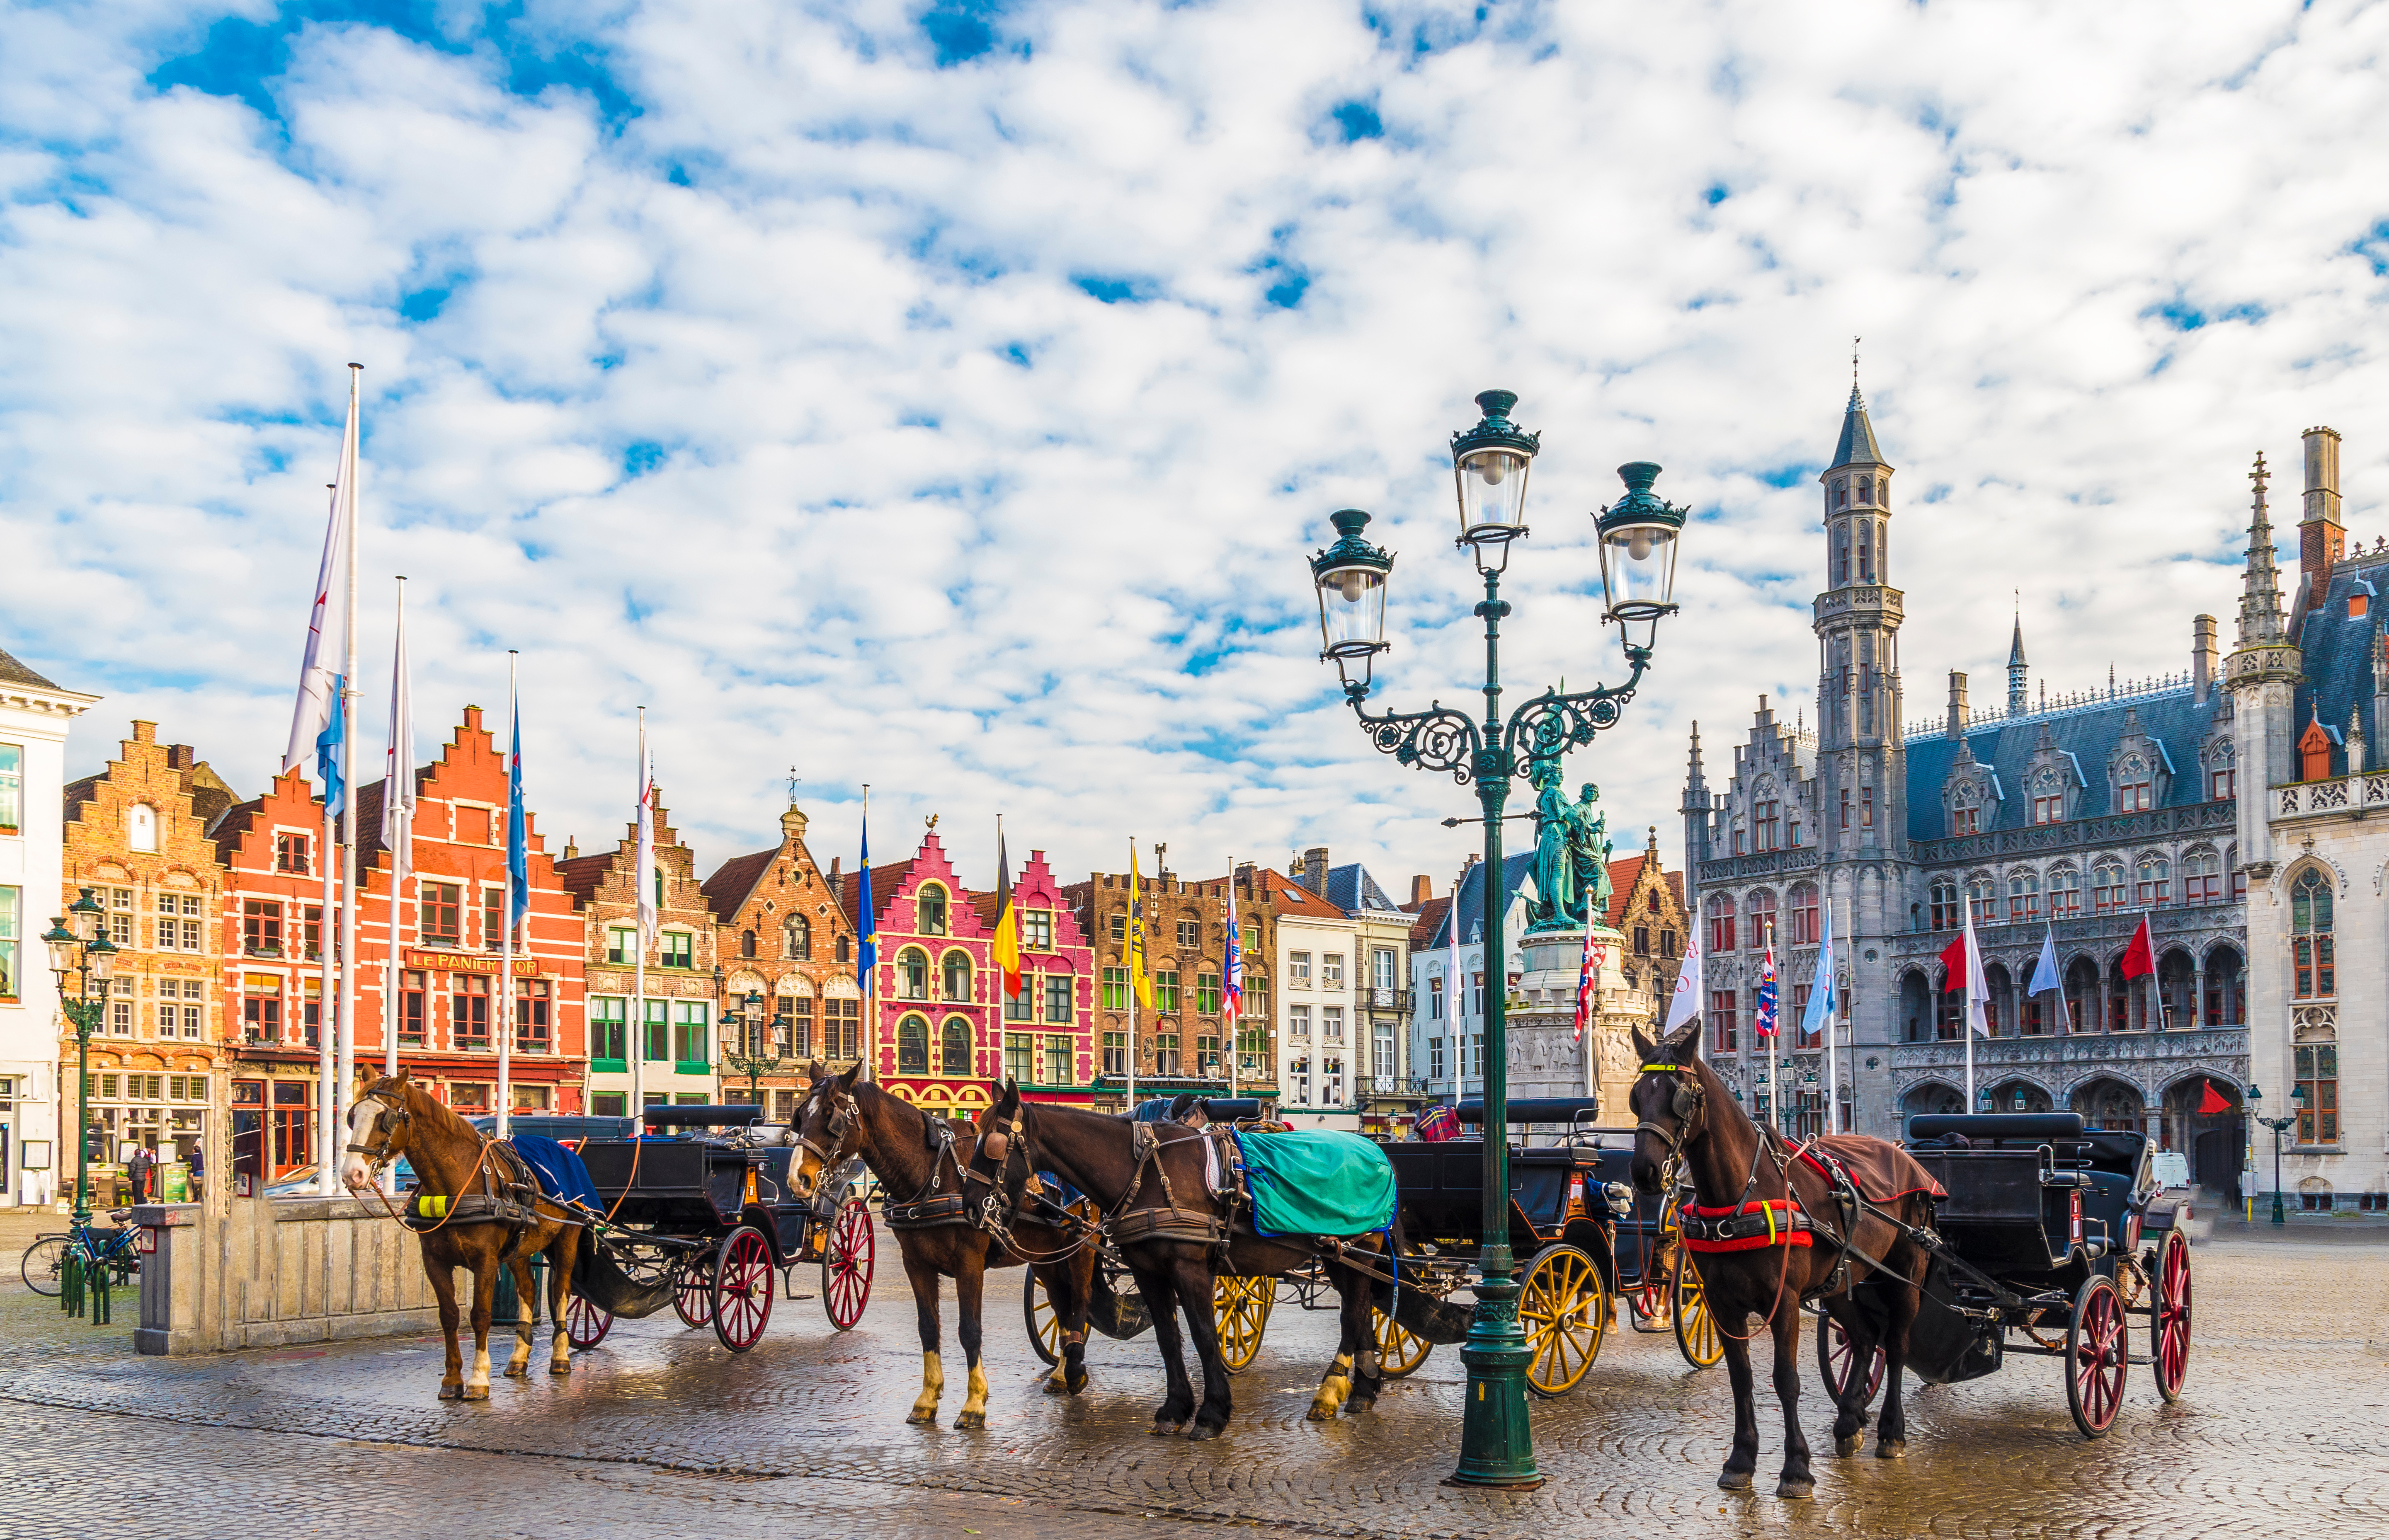 Bruges Day Tour from Amsterdam - Amsterdam - 